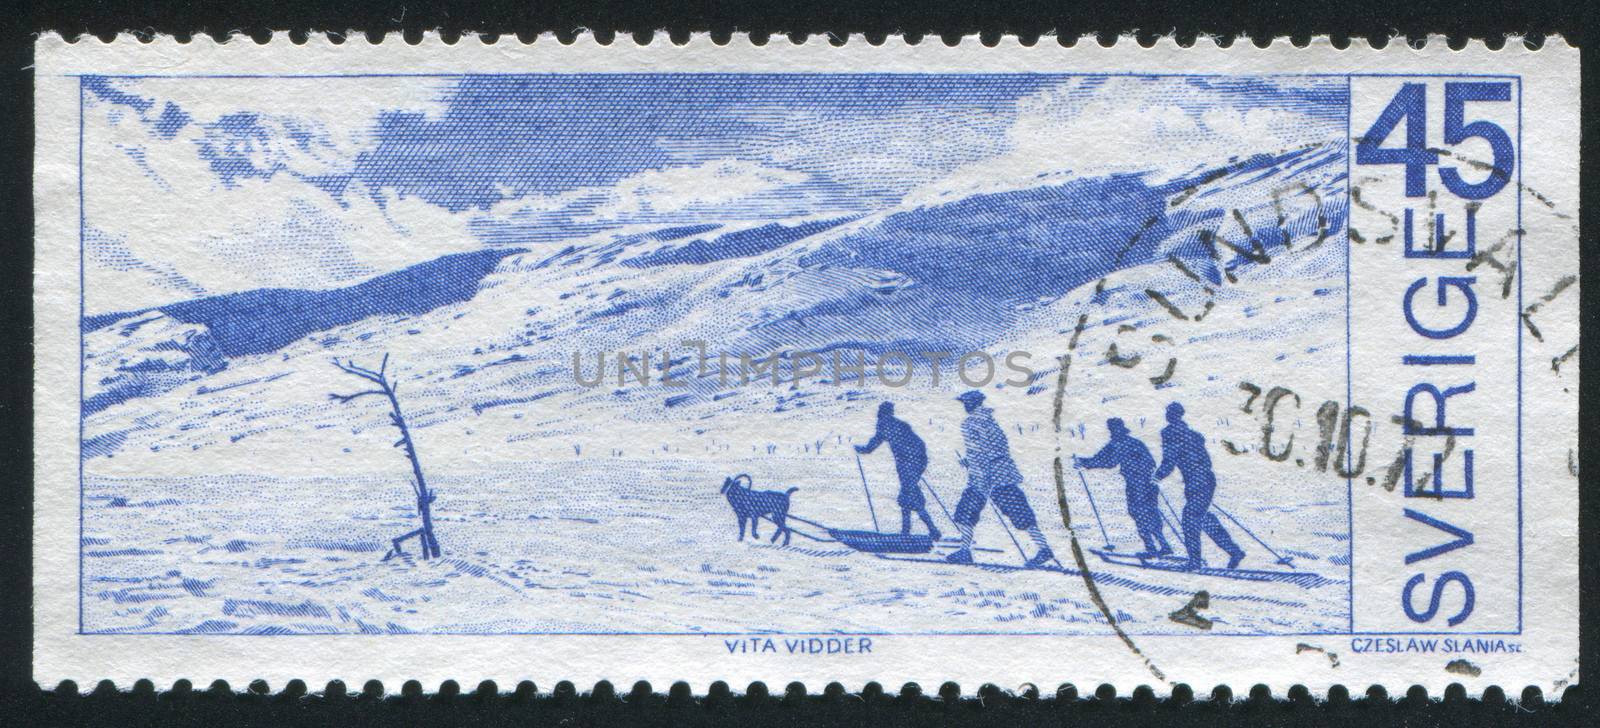 SWEDEN - CIRCA 1970: stamp printed by Sweden, shows Skiing, circa 1970